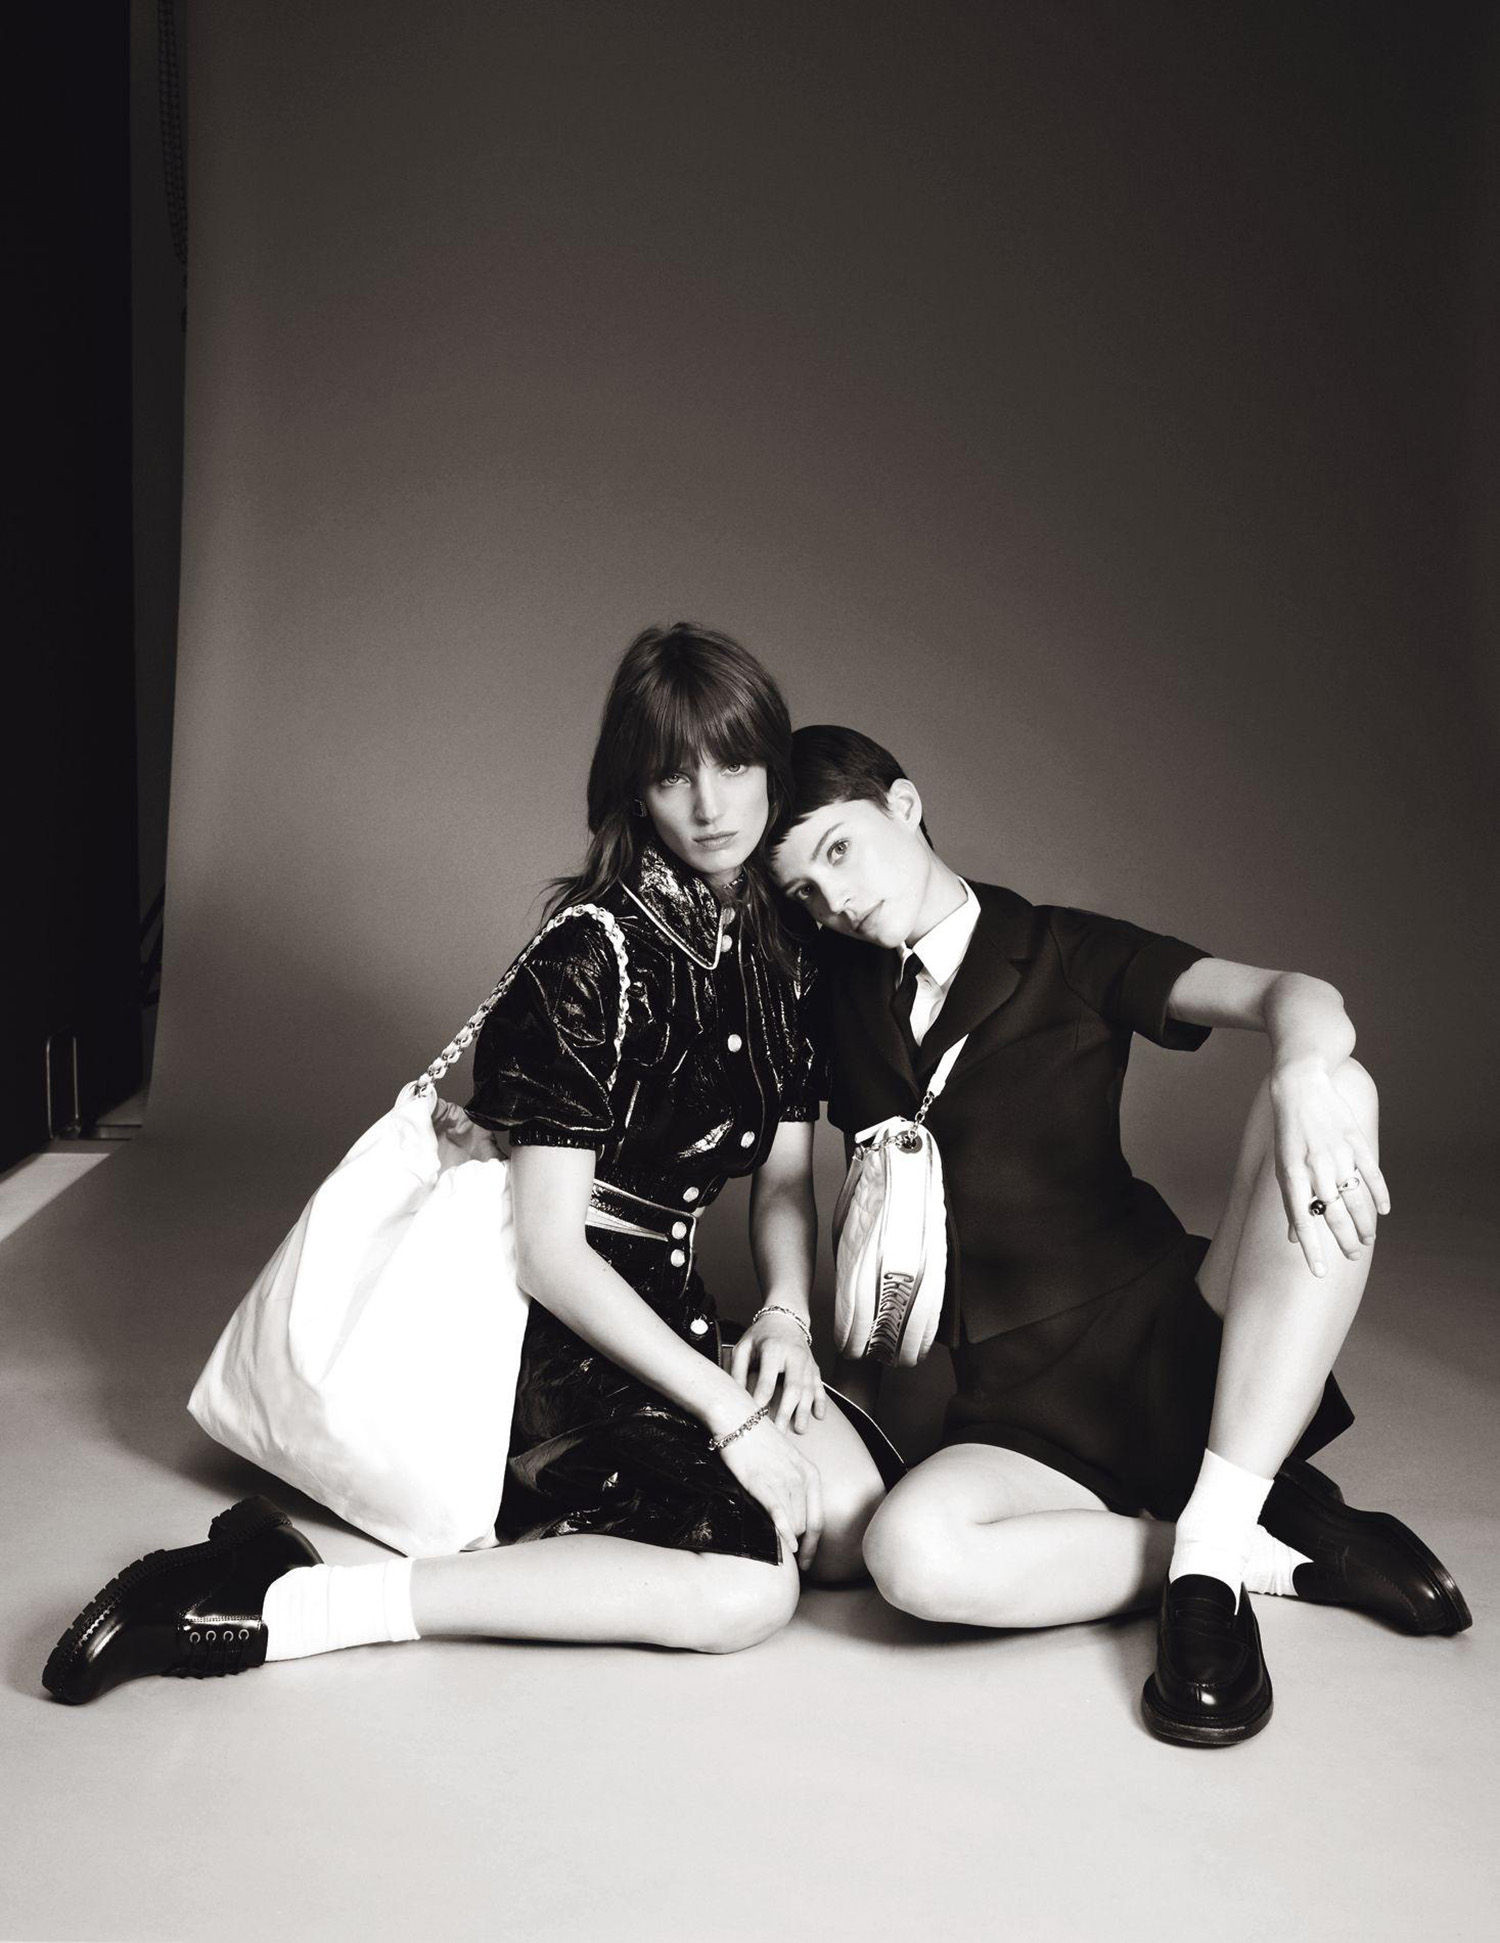 Loane Normand and Fanny François by Luc Braquet for Madame Figaro January 21st, 2022